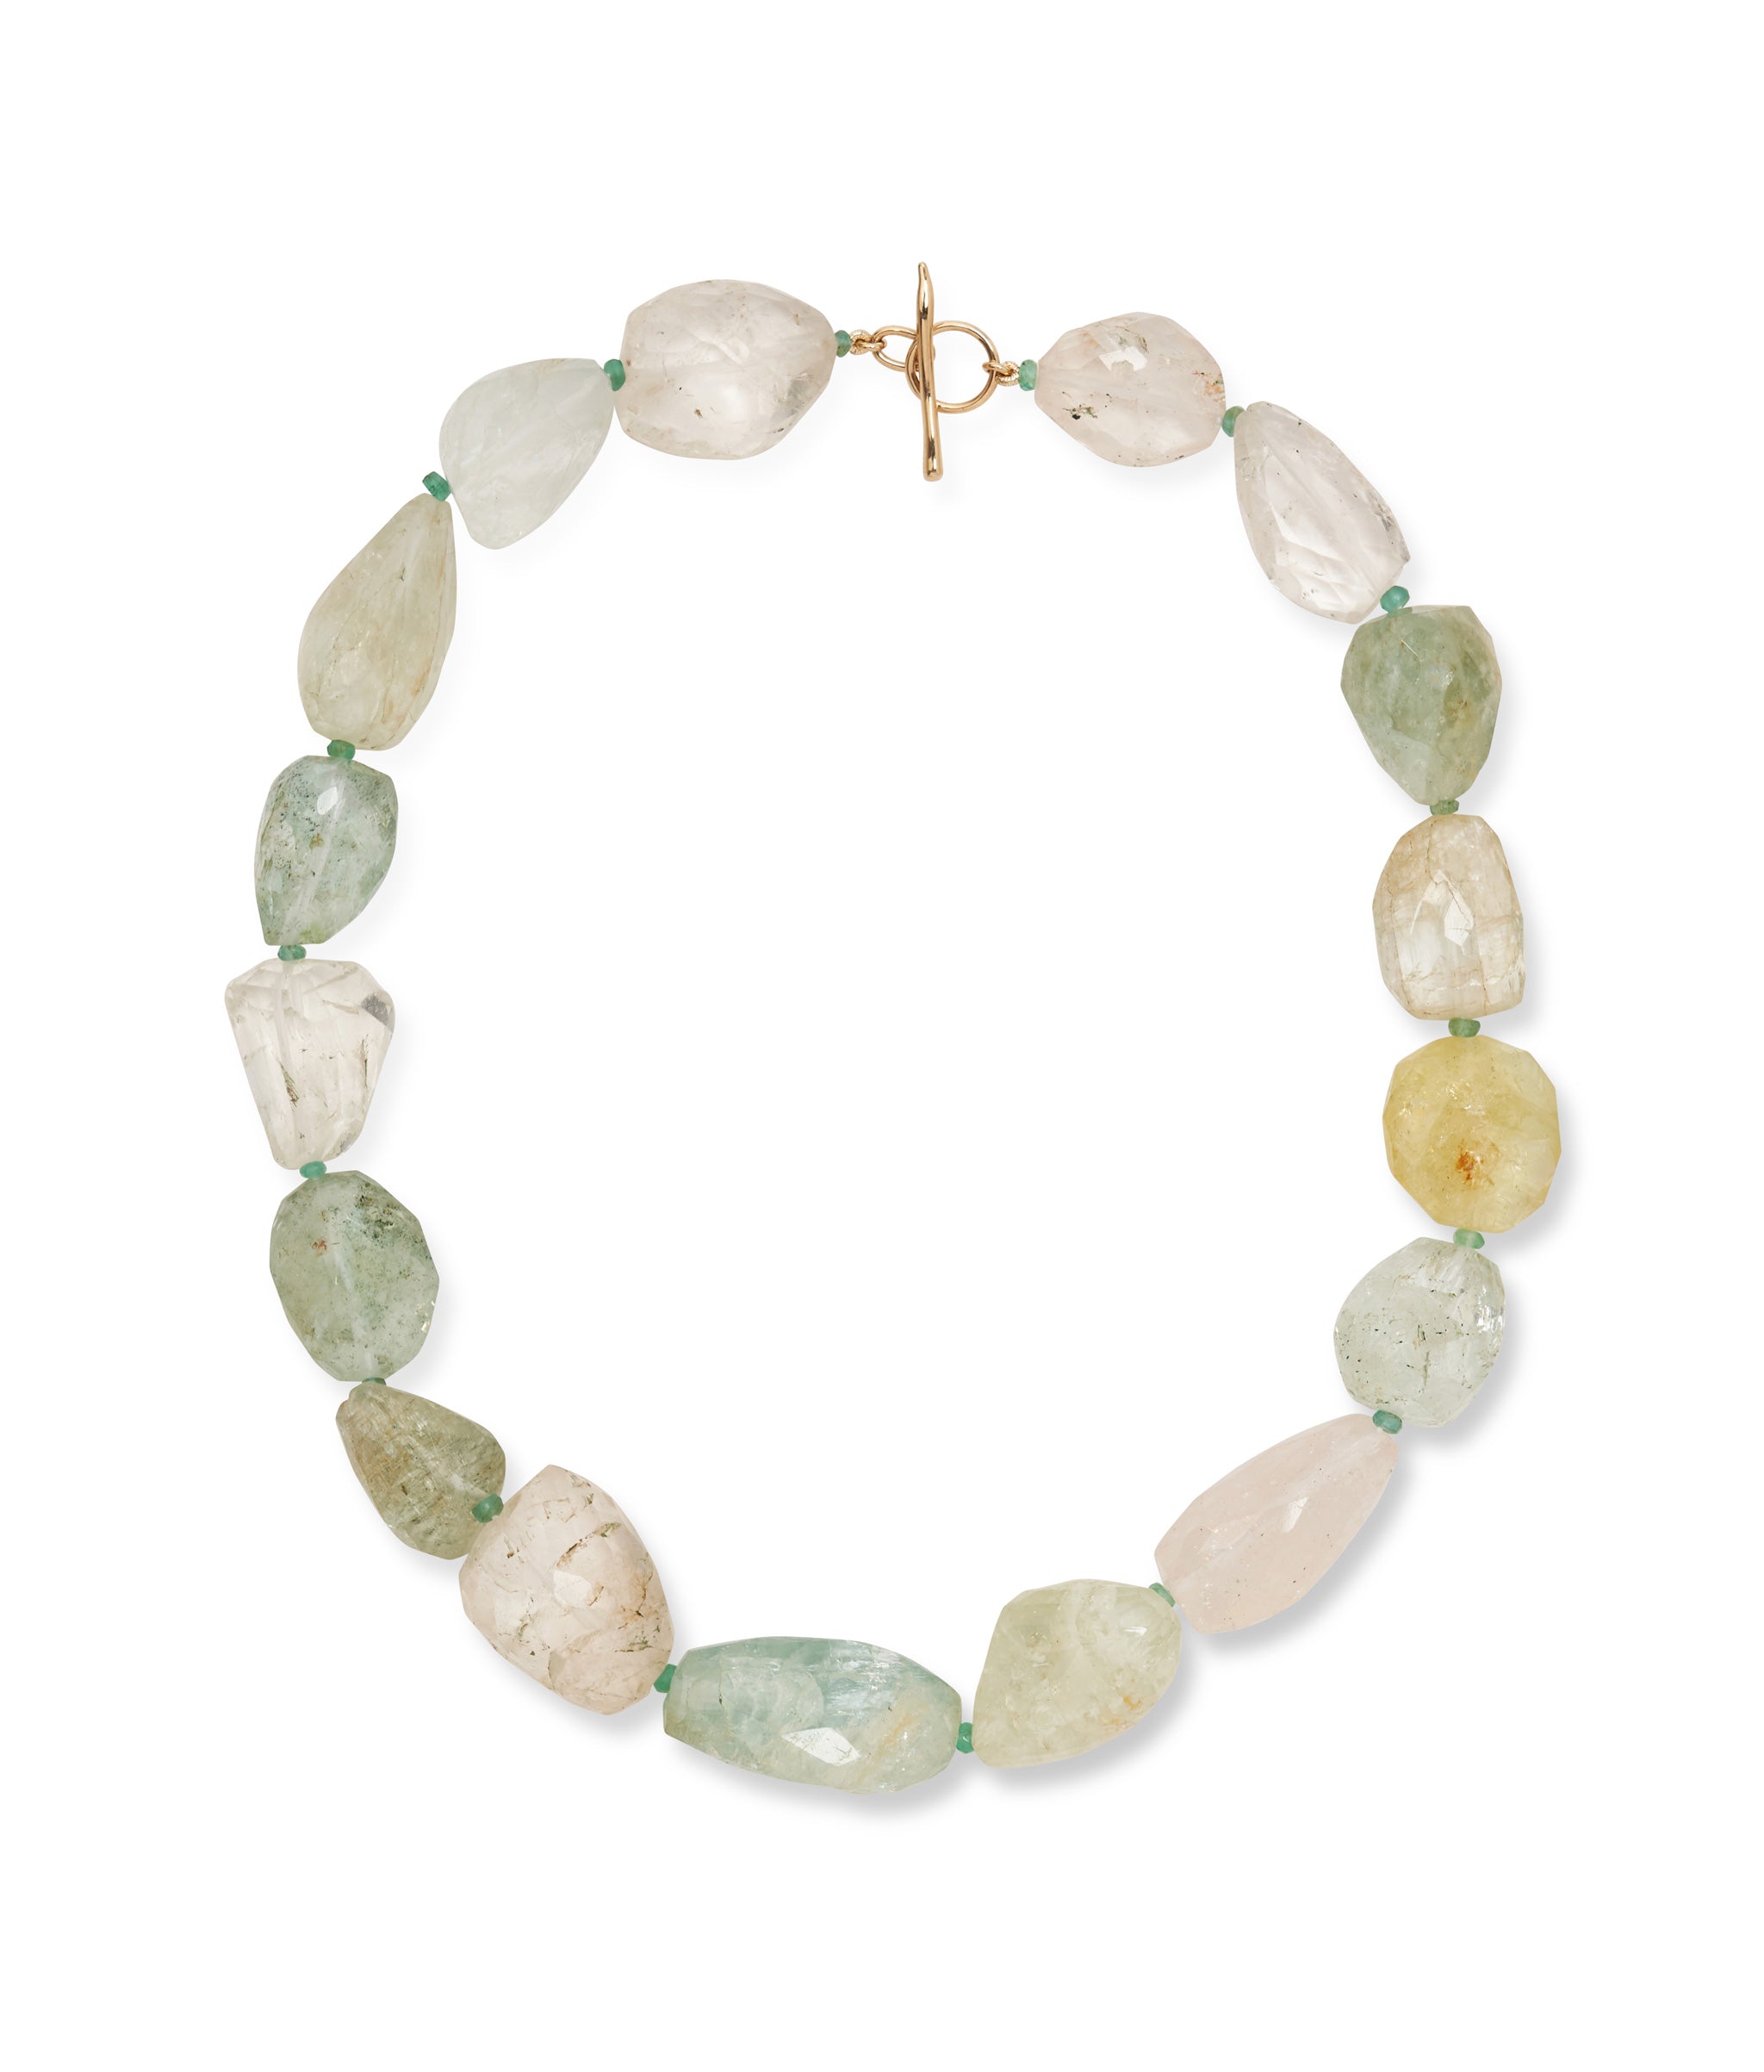 Large Faceted Aquamarine Nugget, Emerald & 14k Gold Necklace. Freeform blue-green nuggets dotted with tiny emerald beads